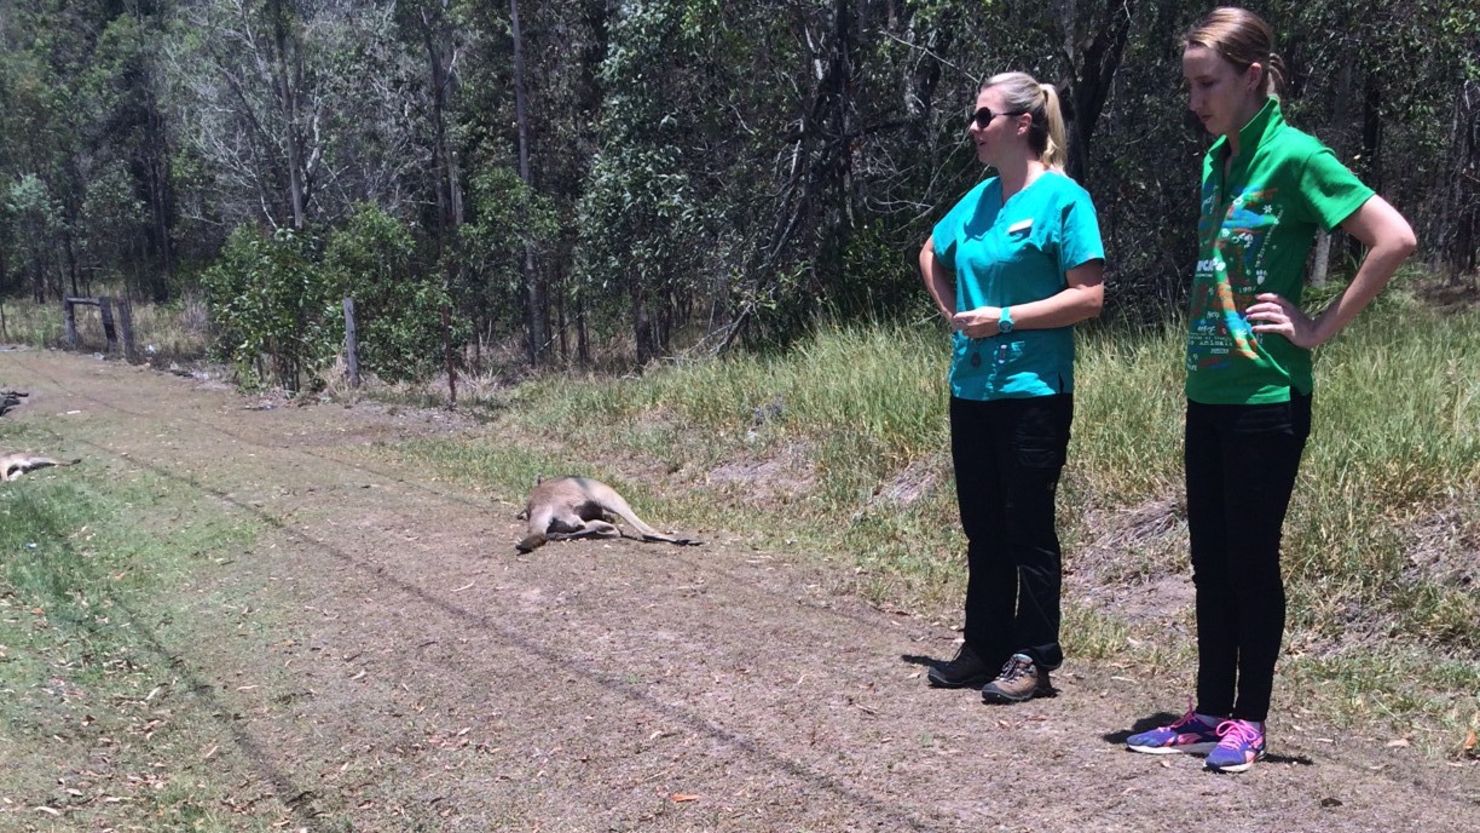 The RSPCA says the area's popular with kangaroos who feed on fresh grass near the side of the road.